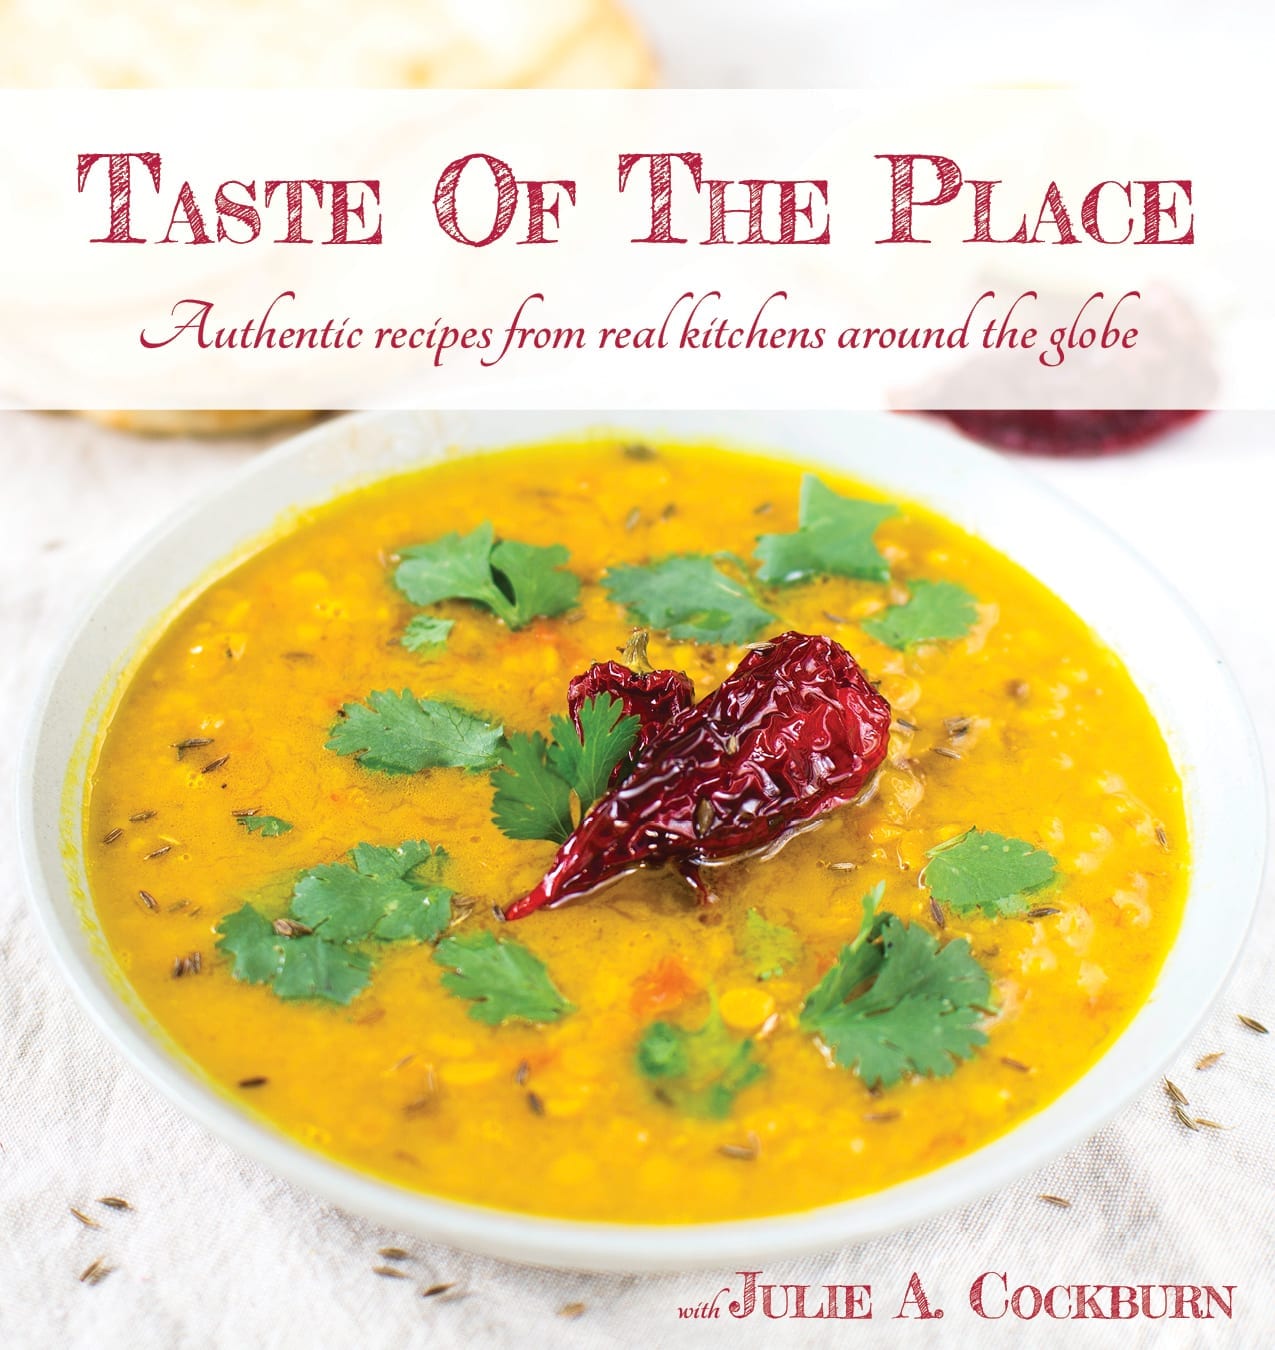 The Taste Of The Place at TasteOfThePlace.com